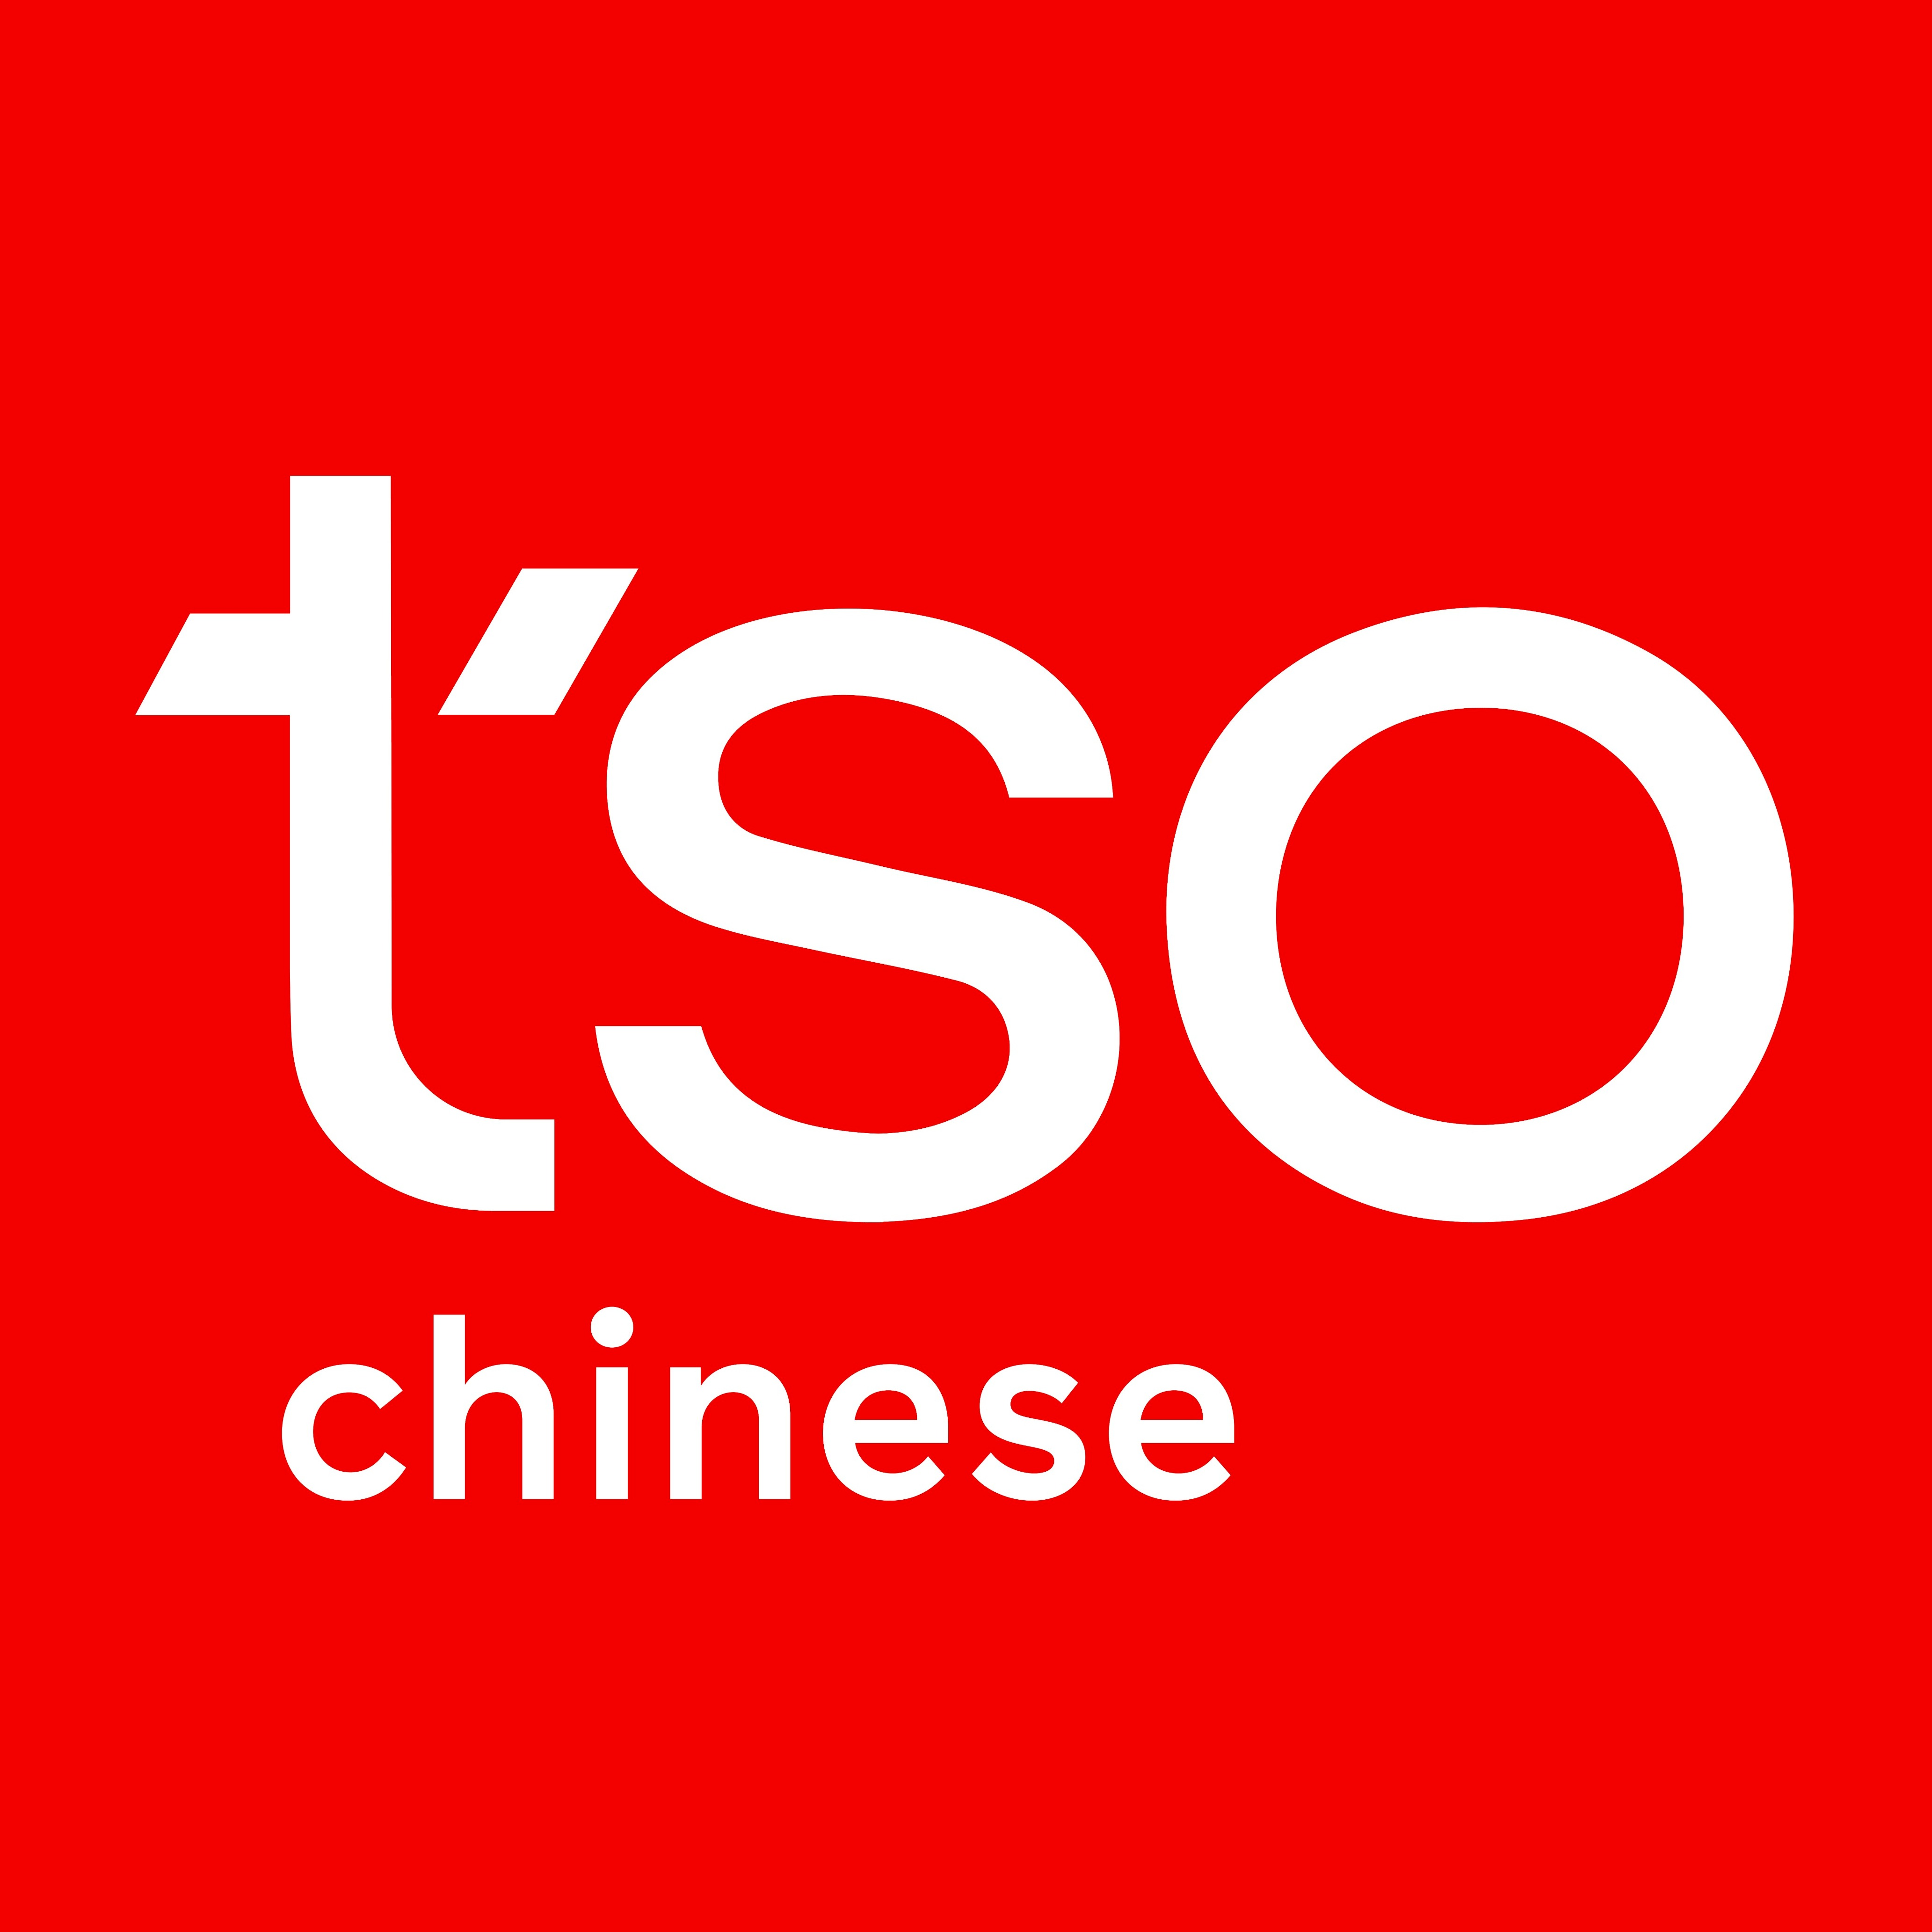 Tso Chinese Delivery Photo